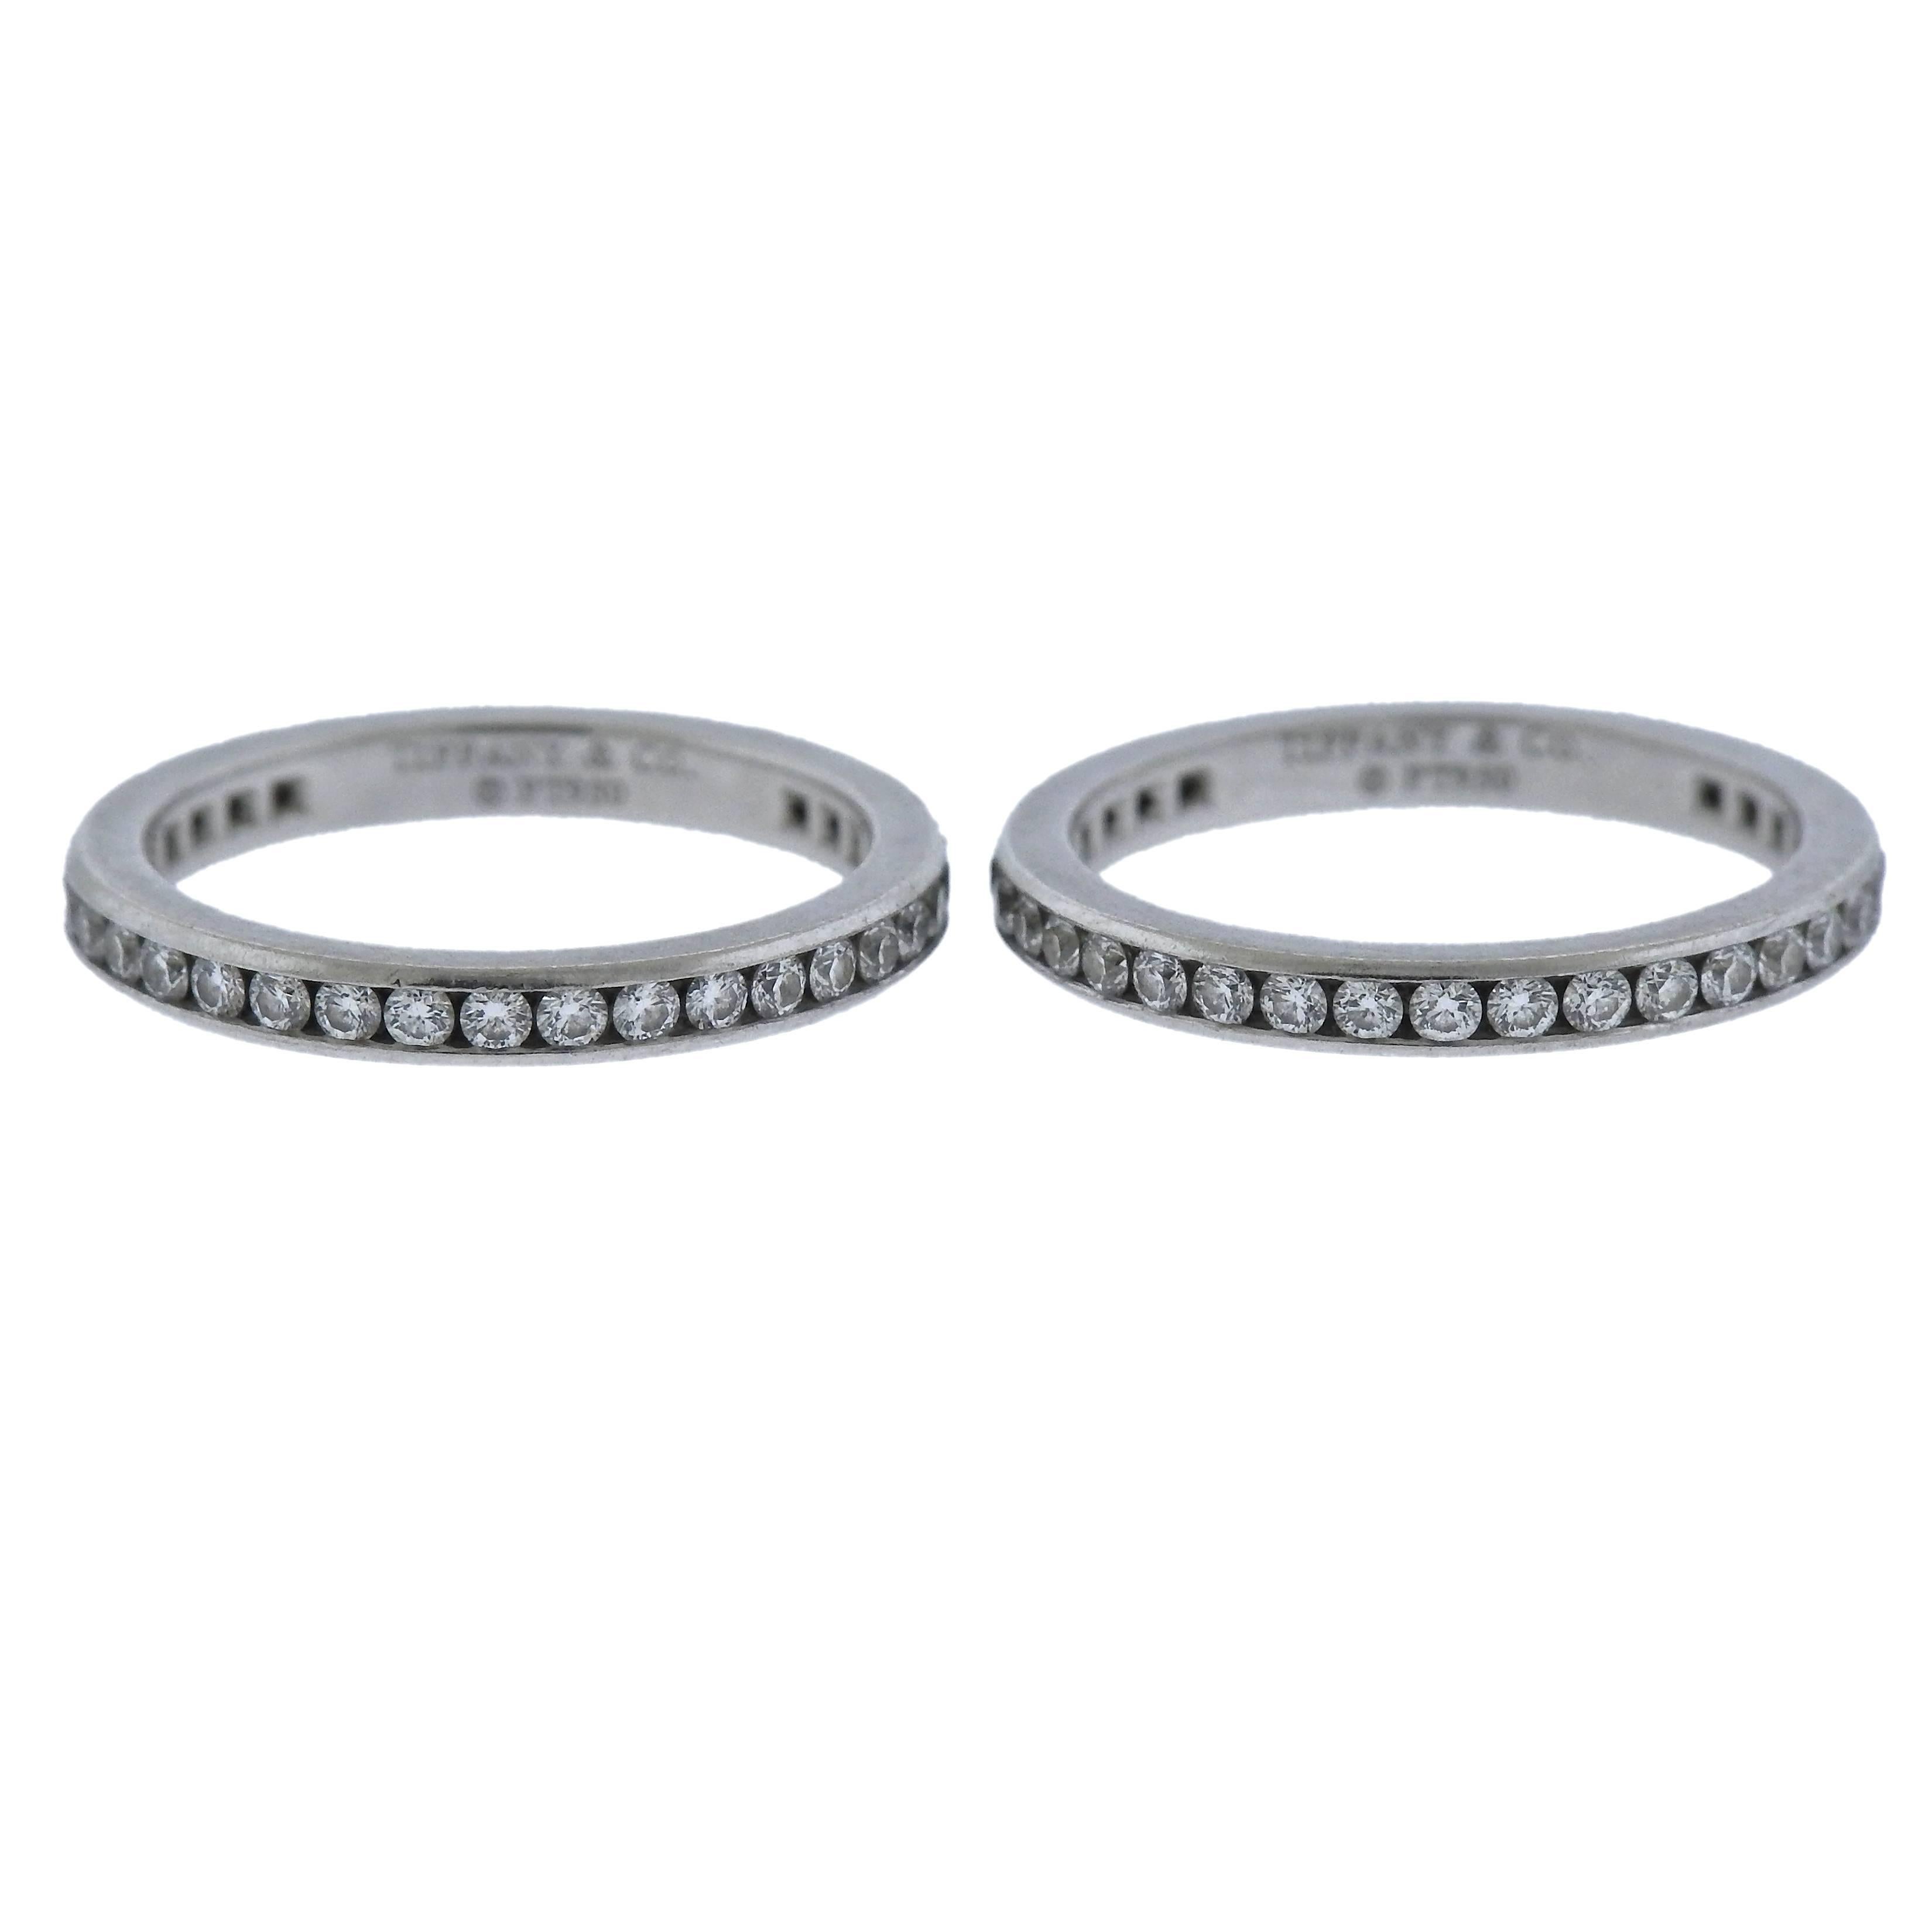 Platinum wedding band ring set, designed by Tiffany & Co, decorated with a total of approx. 0.72ctw in G/VS diamonds. Ring sizes - 4.5 each, bands are 2.3mm wide, weigh 6 grams. Marked: Tiffany & Co, pt950.